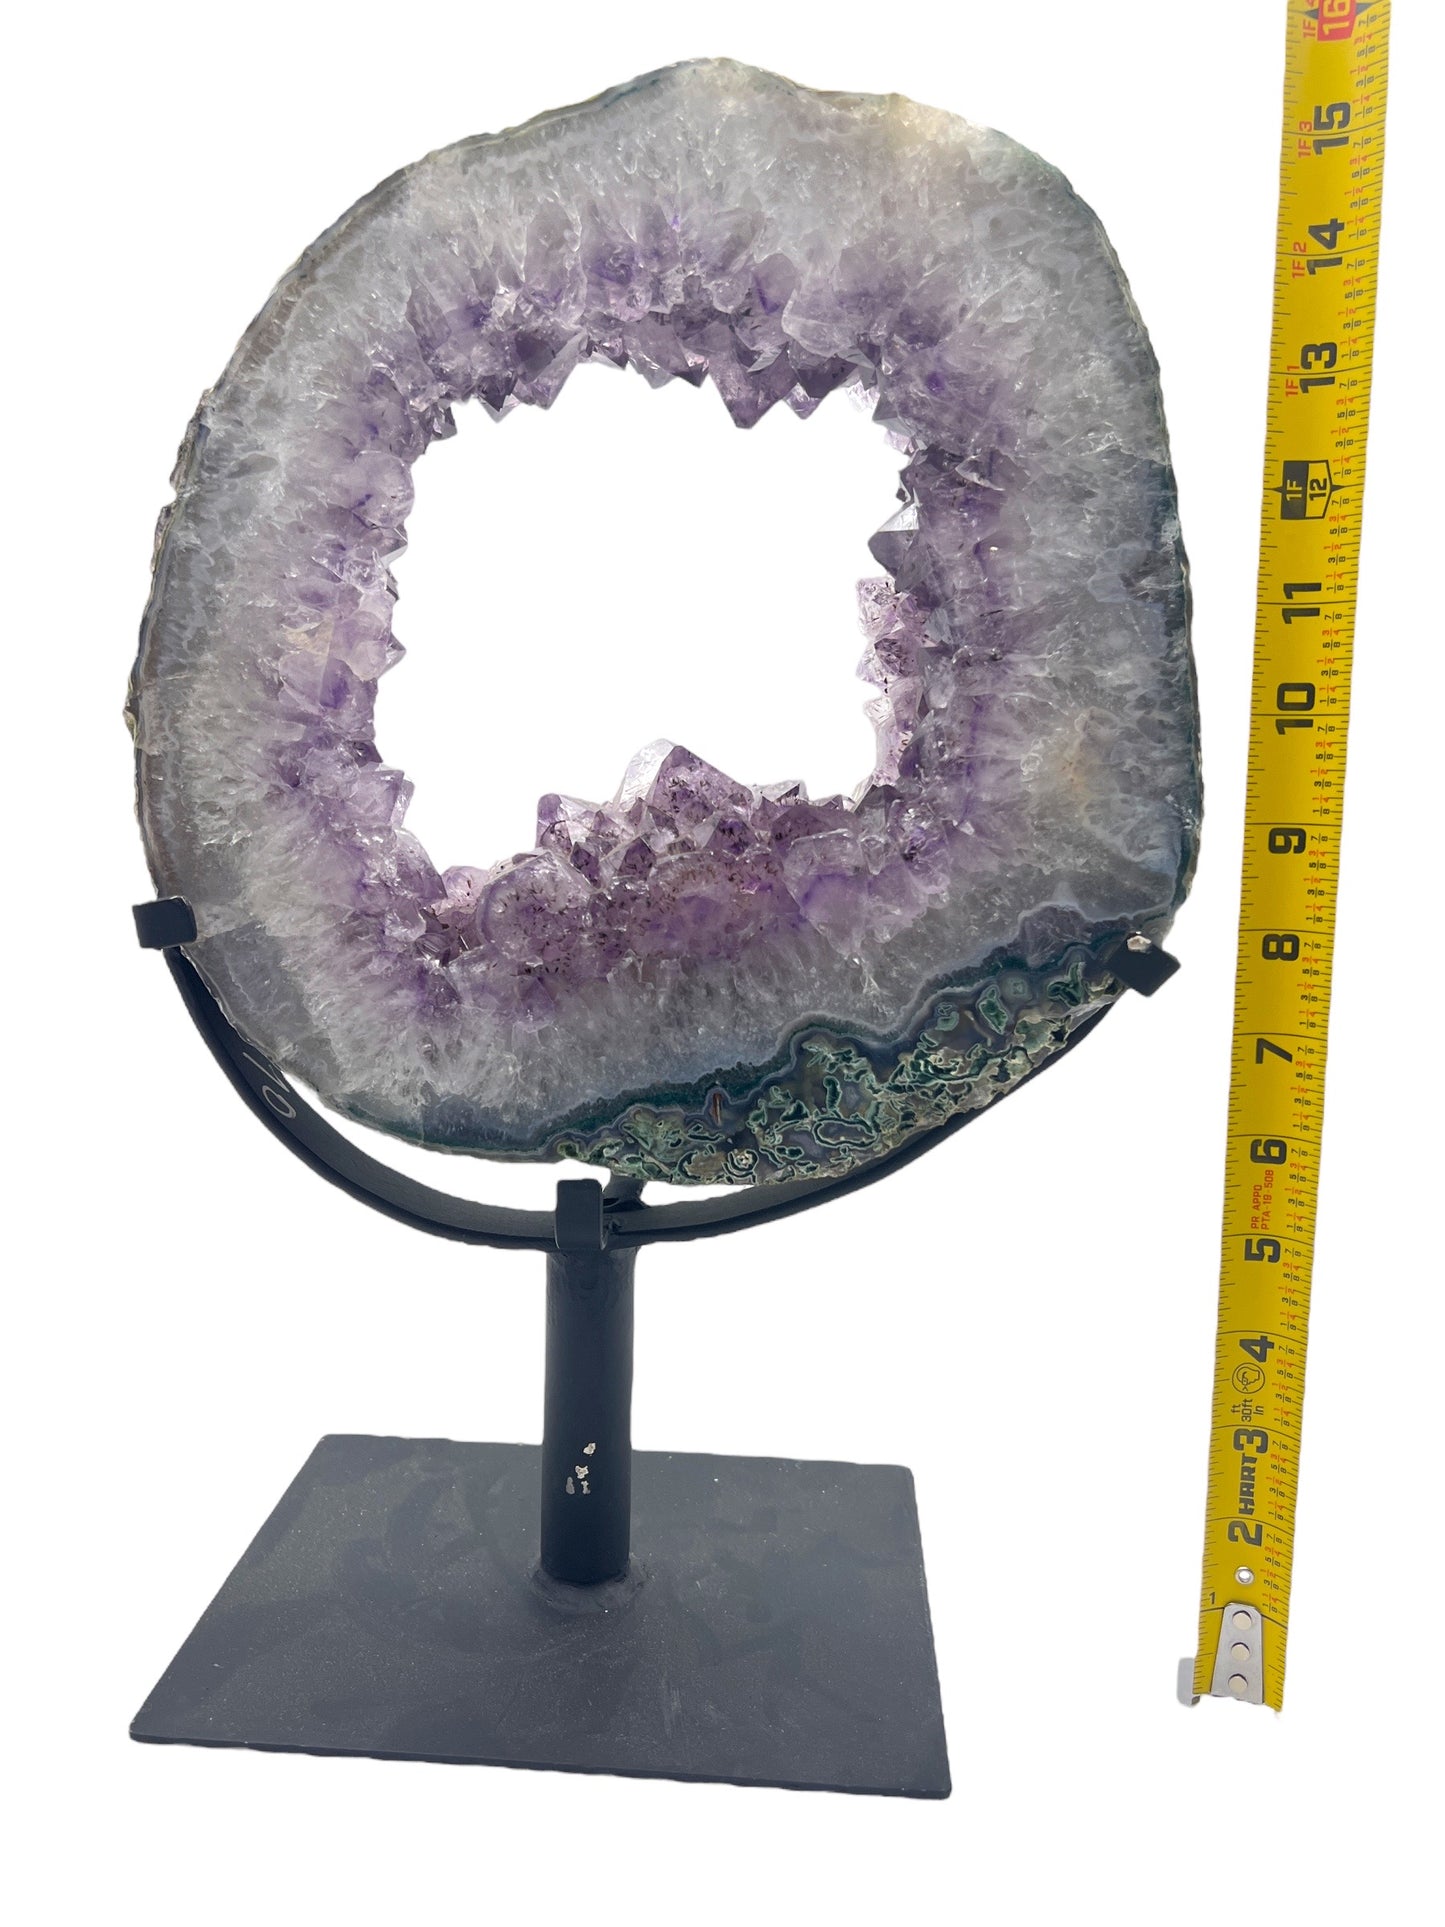 Amethyst on stand #19